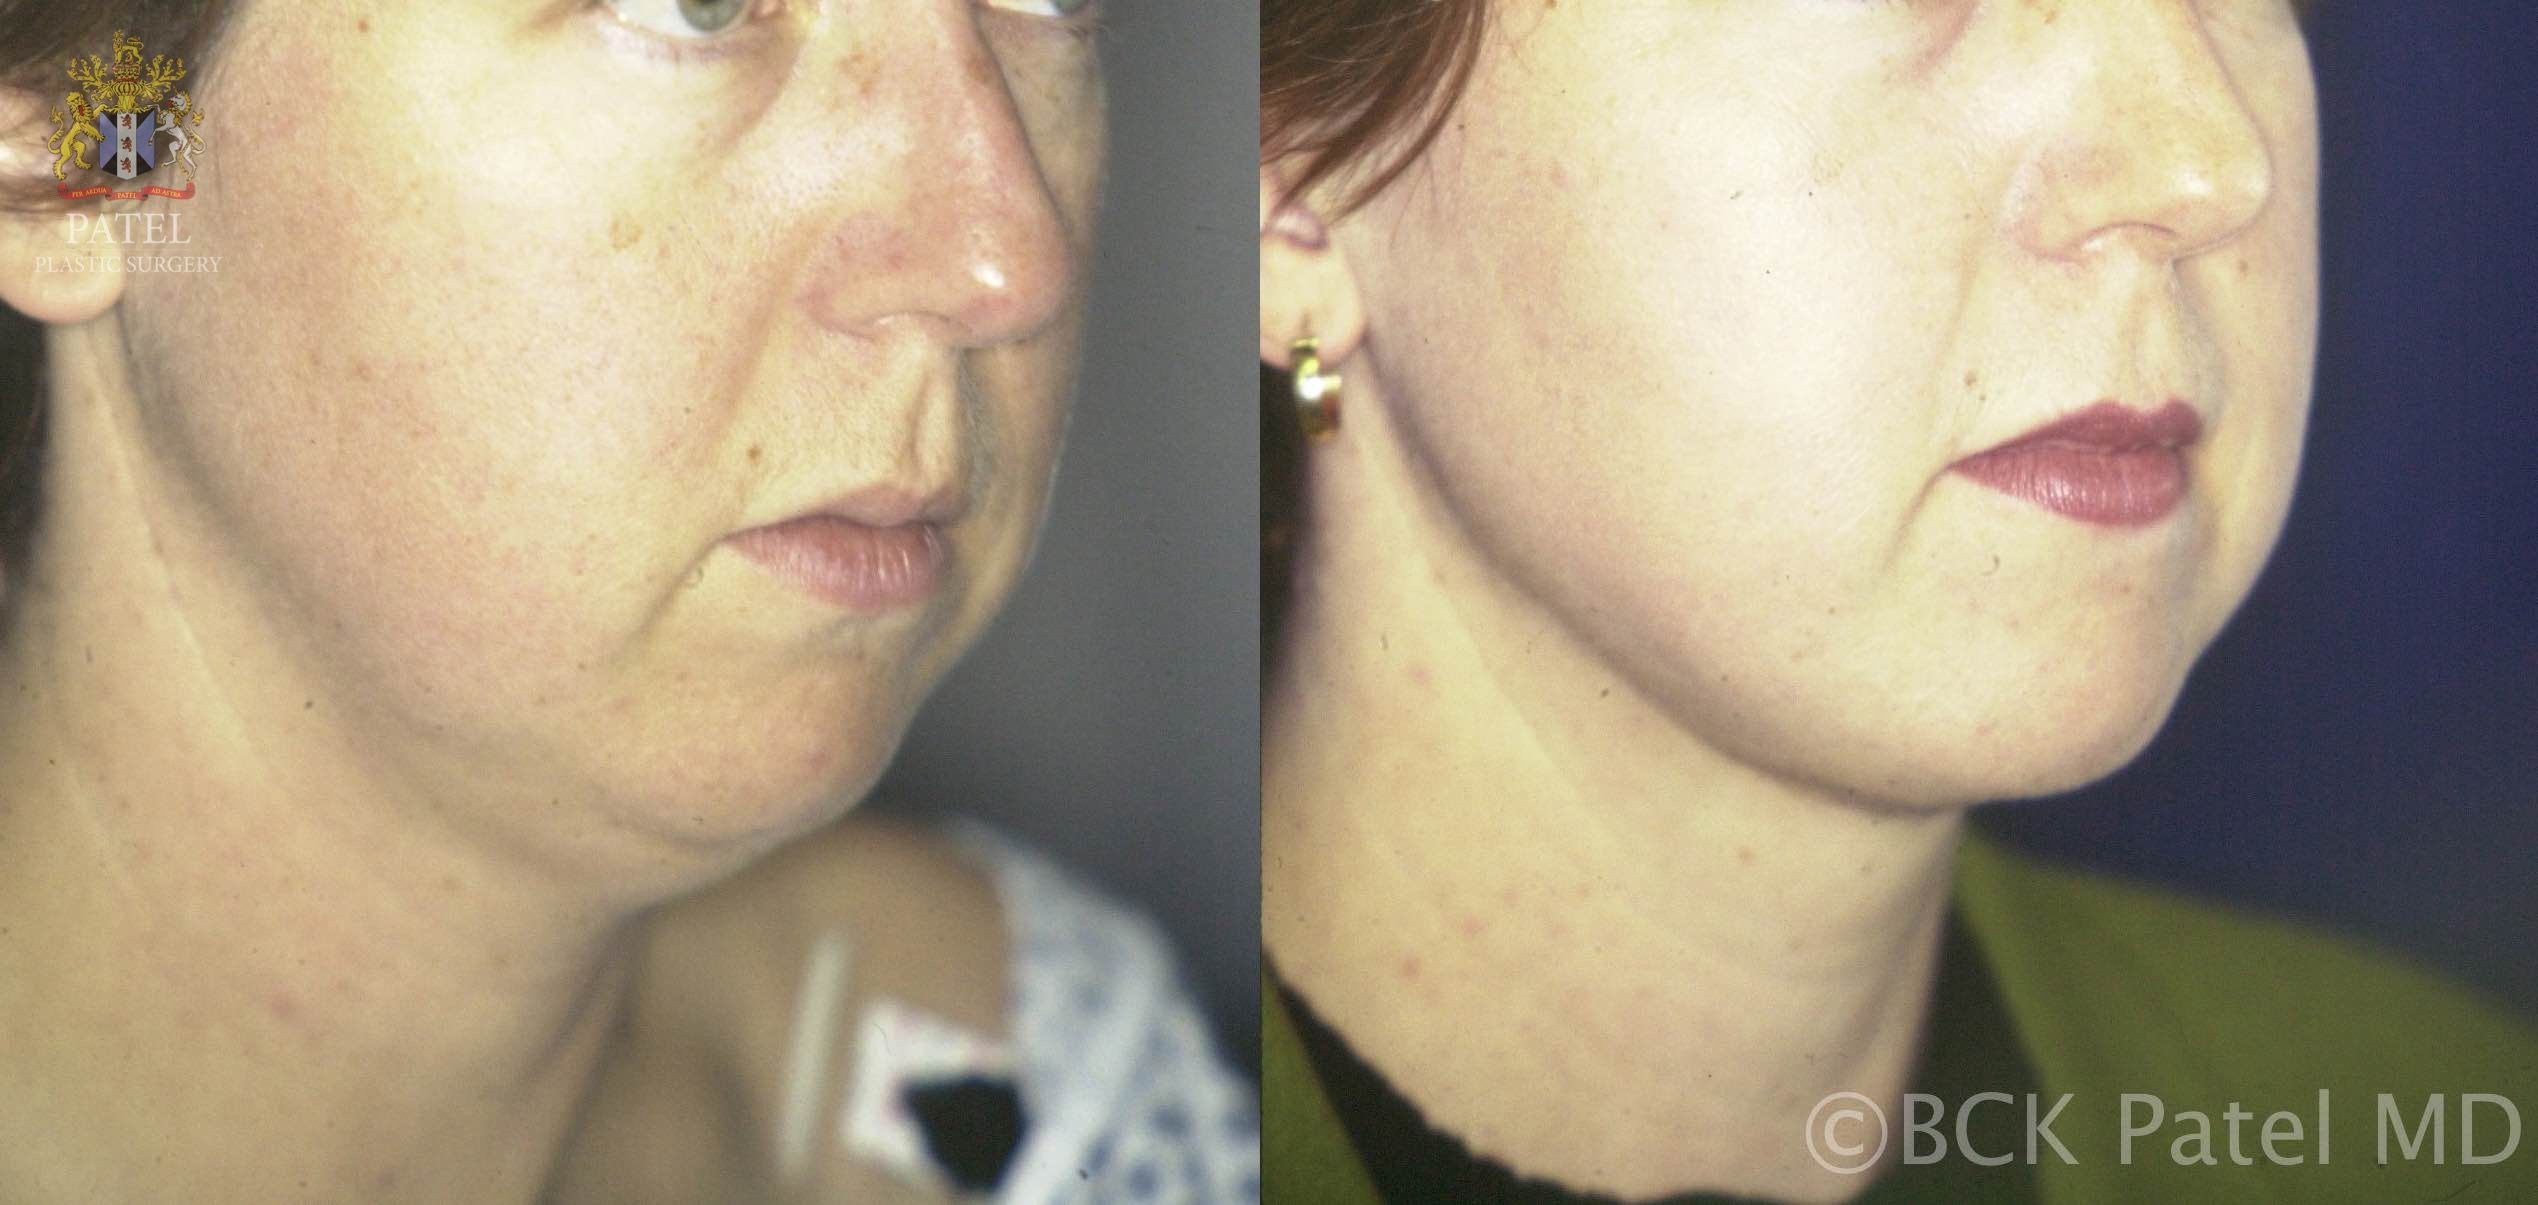 englishsurgeon.com Results of Vaser neck liposuction in Salt Lake City by Dr. BCK Patel MD, FRCS and St. George